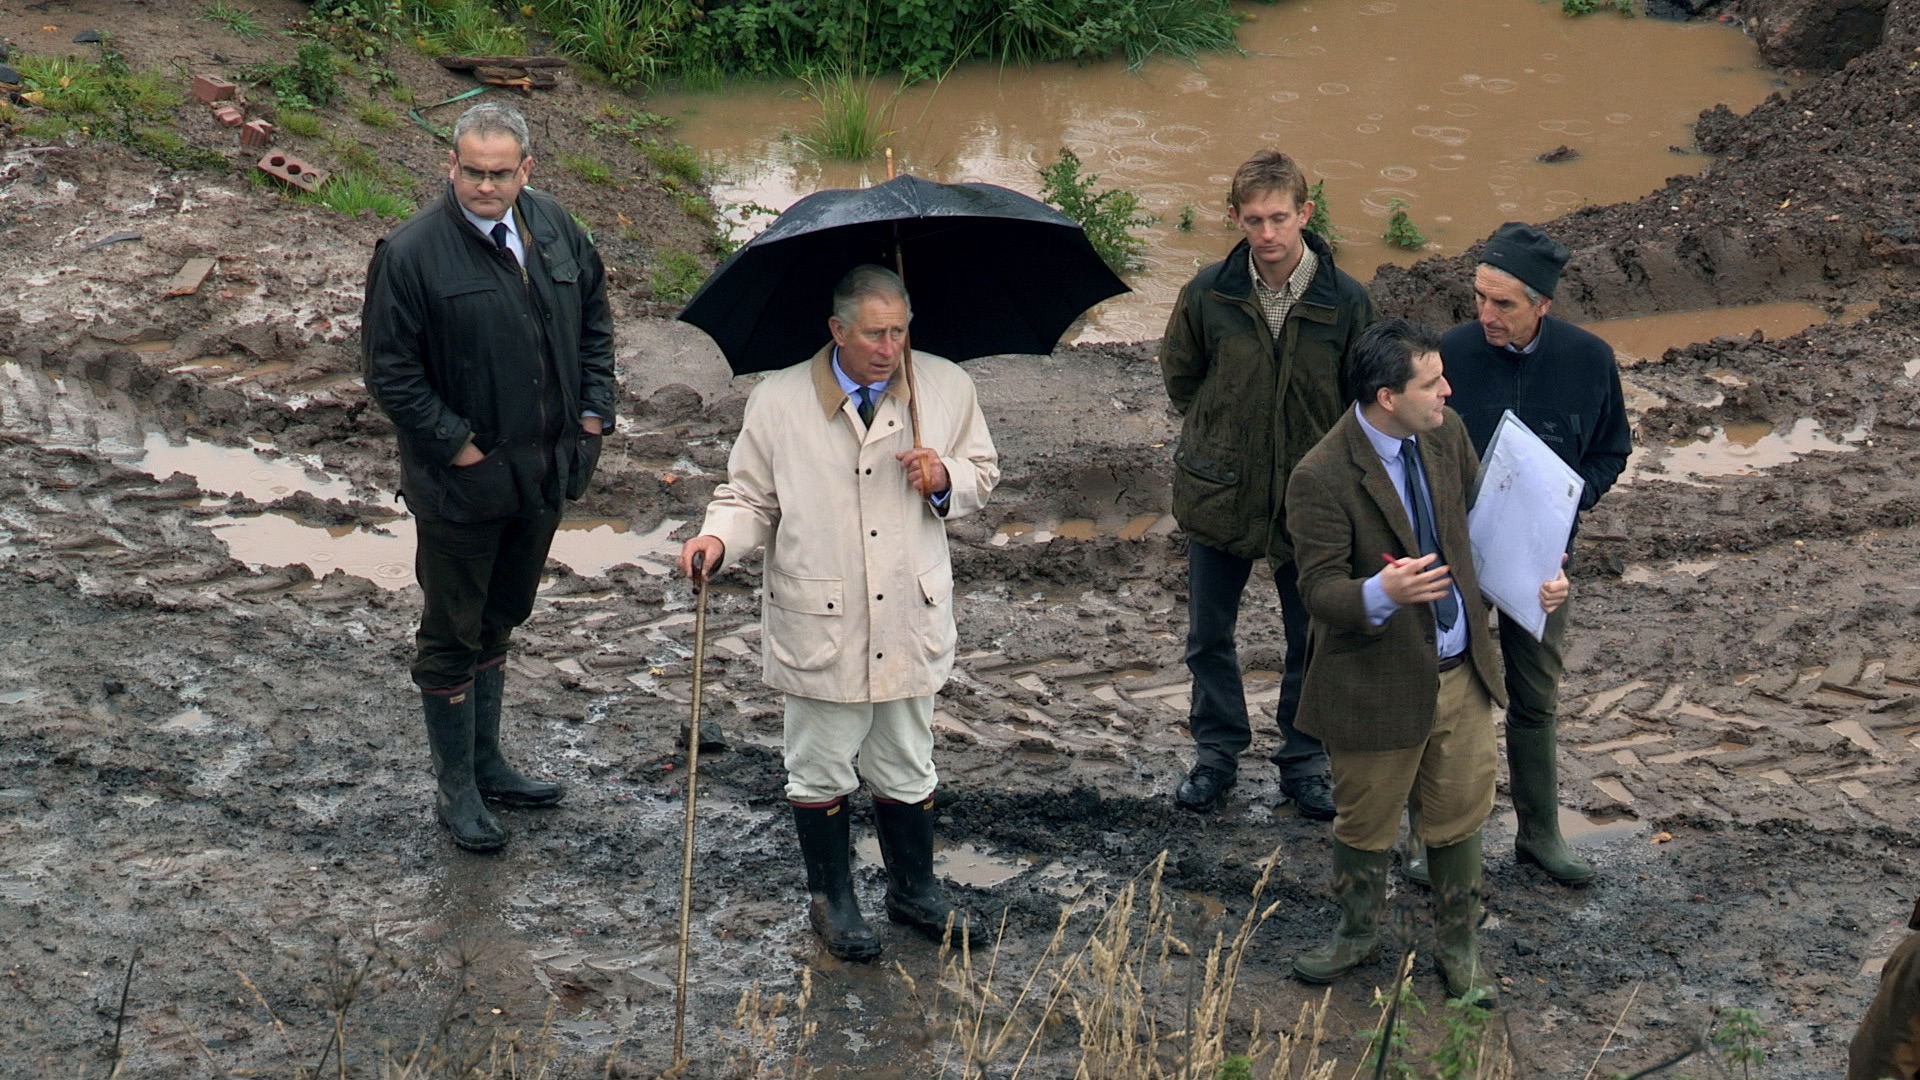 King Charles III, wearing a mackintosh and rubber boots, with an umbrella and a stick, walks through the mud with his team of restorers.